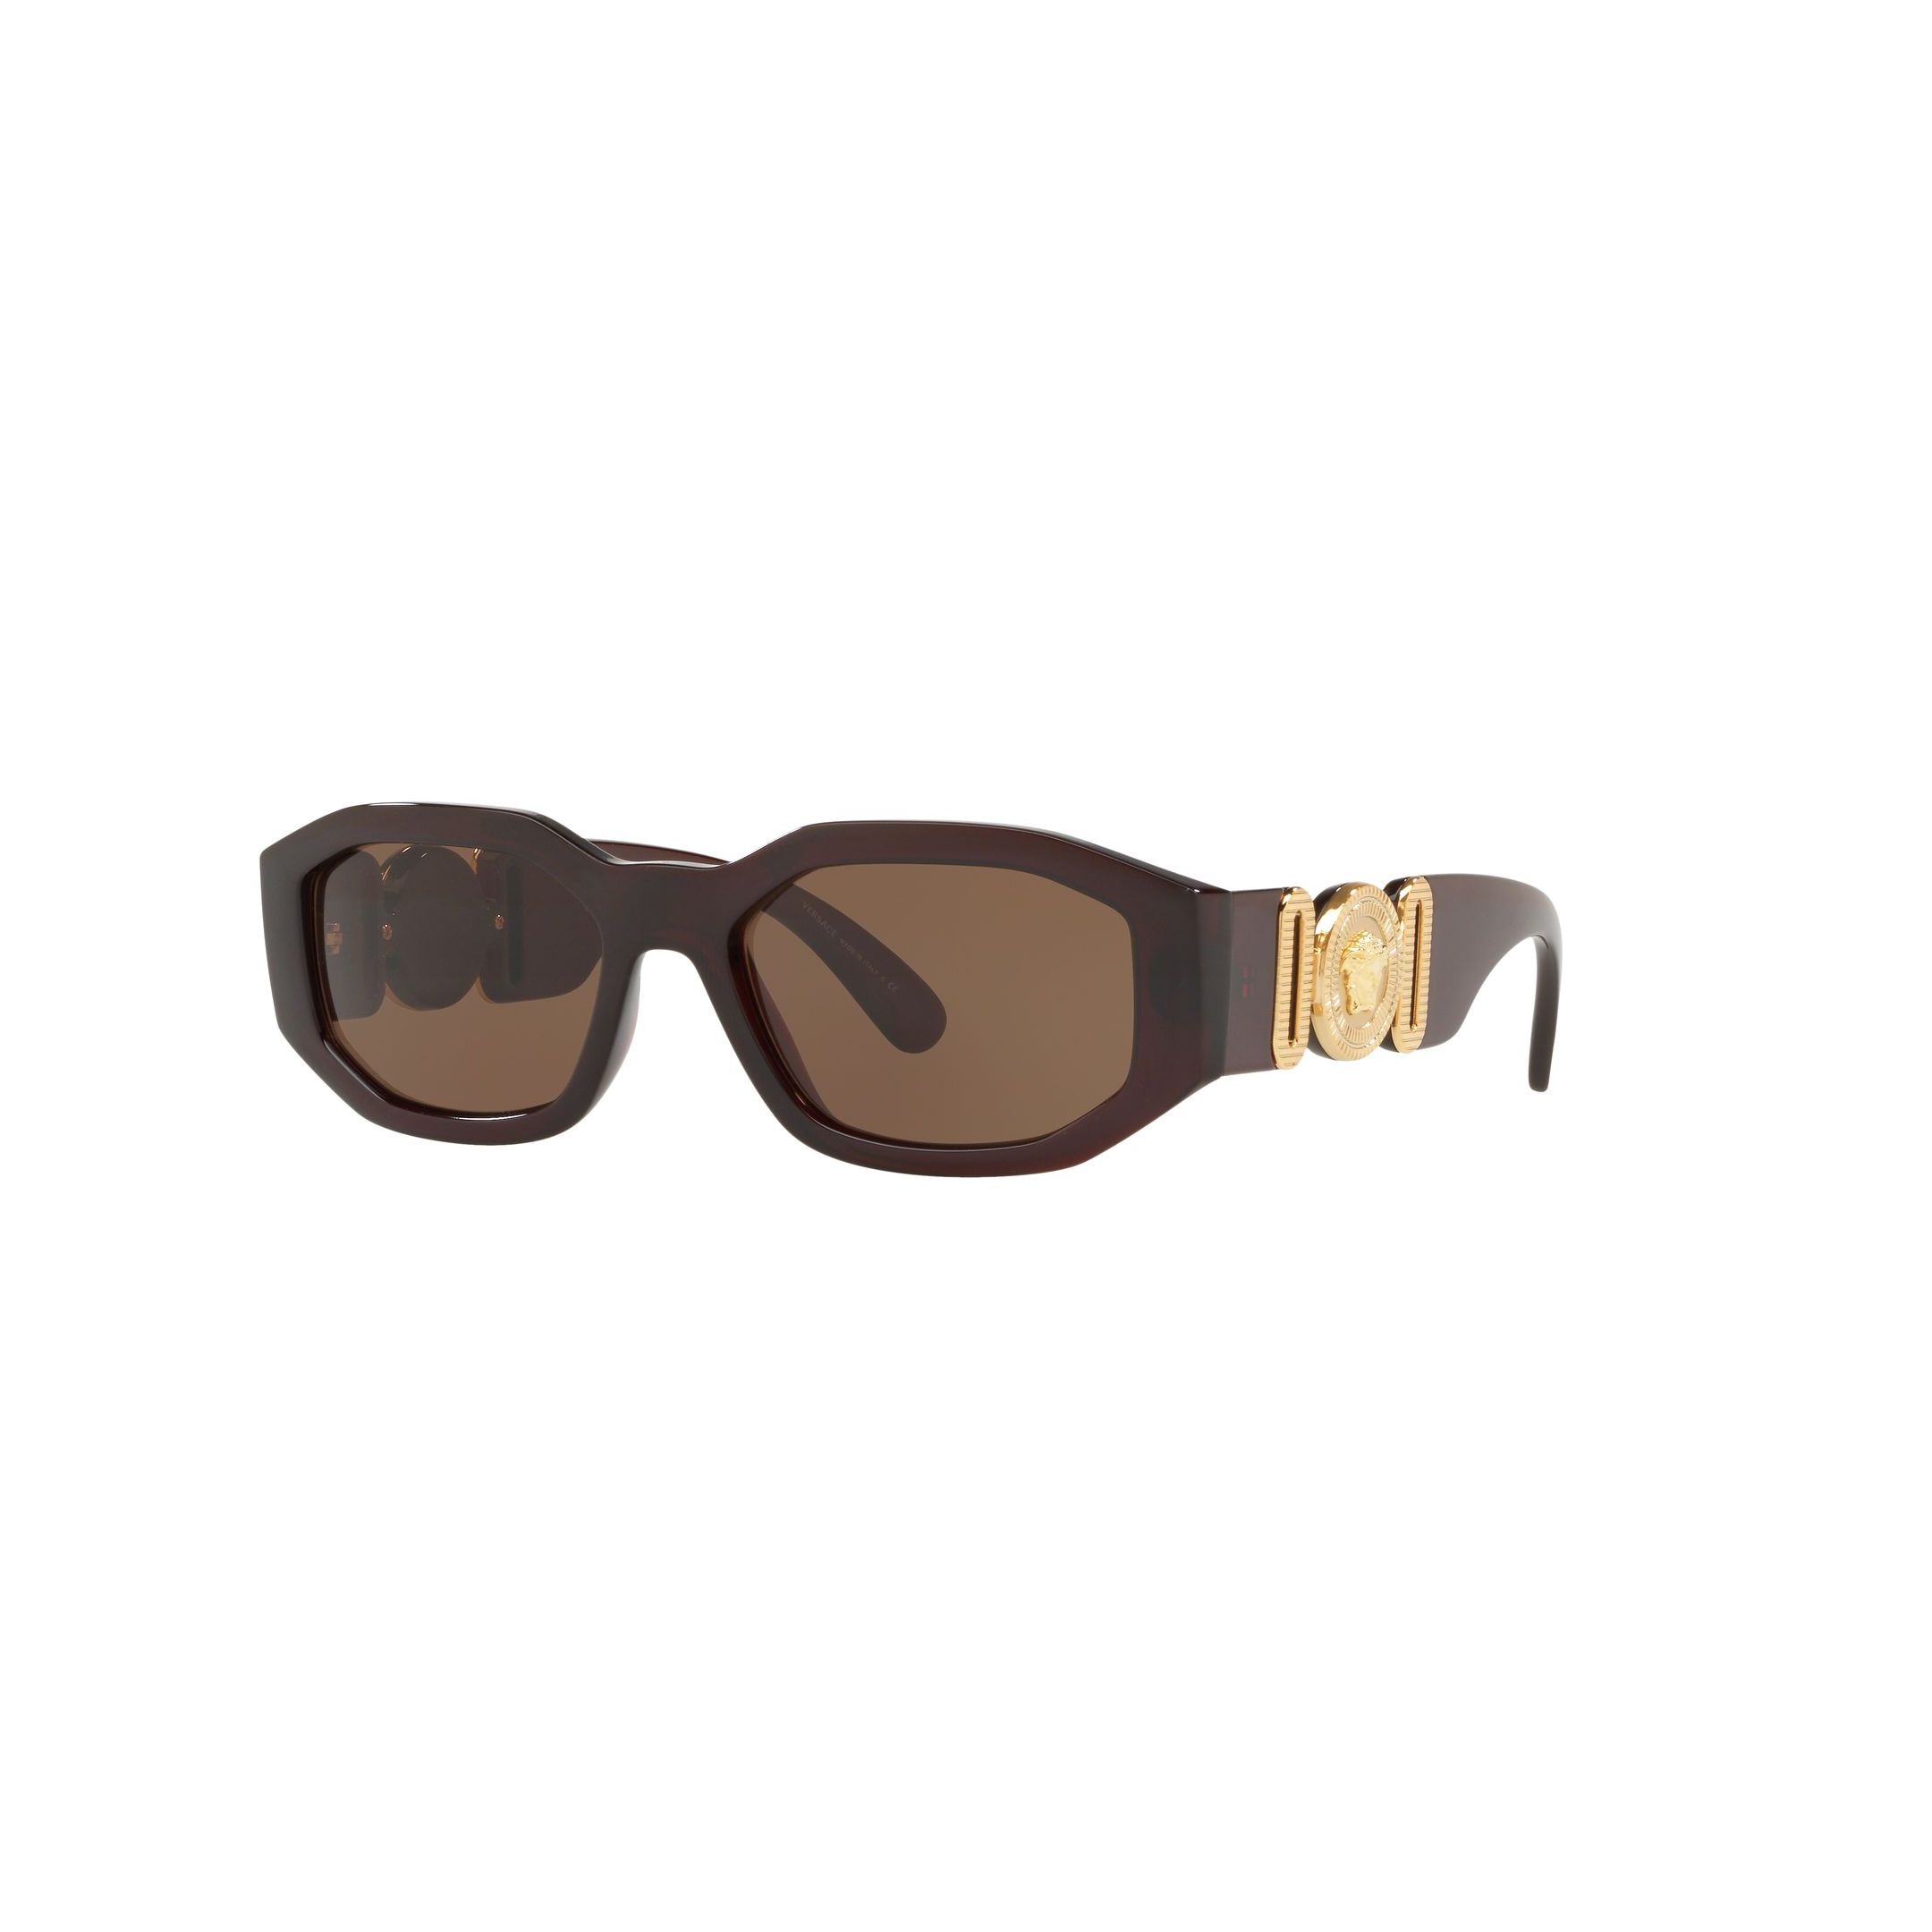 Versace 'Notorious B.I.G' Black And Gold Sunglasses - Rogue